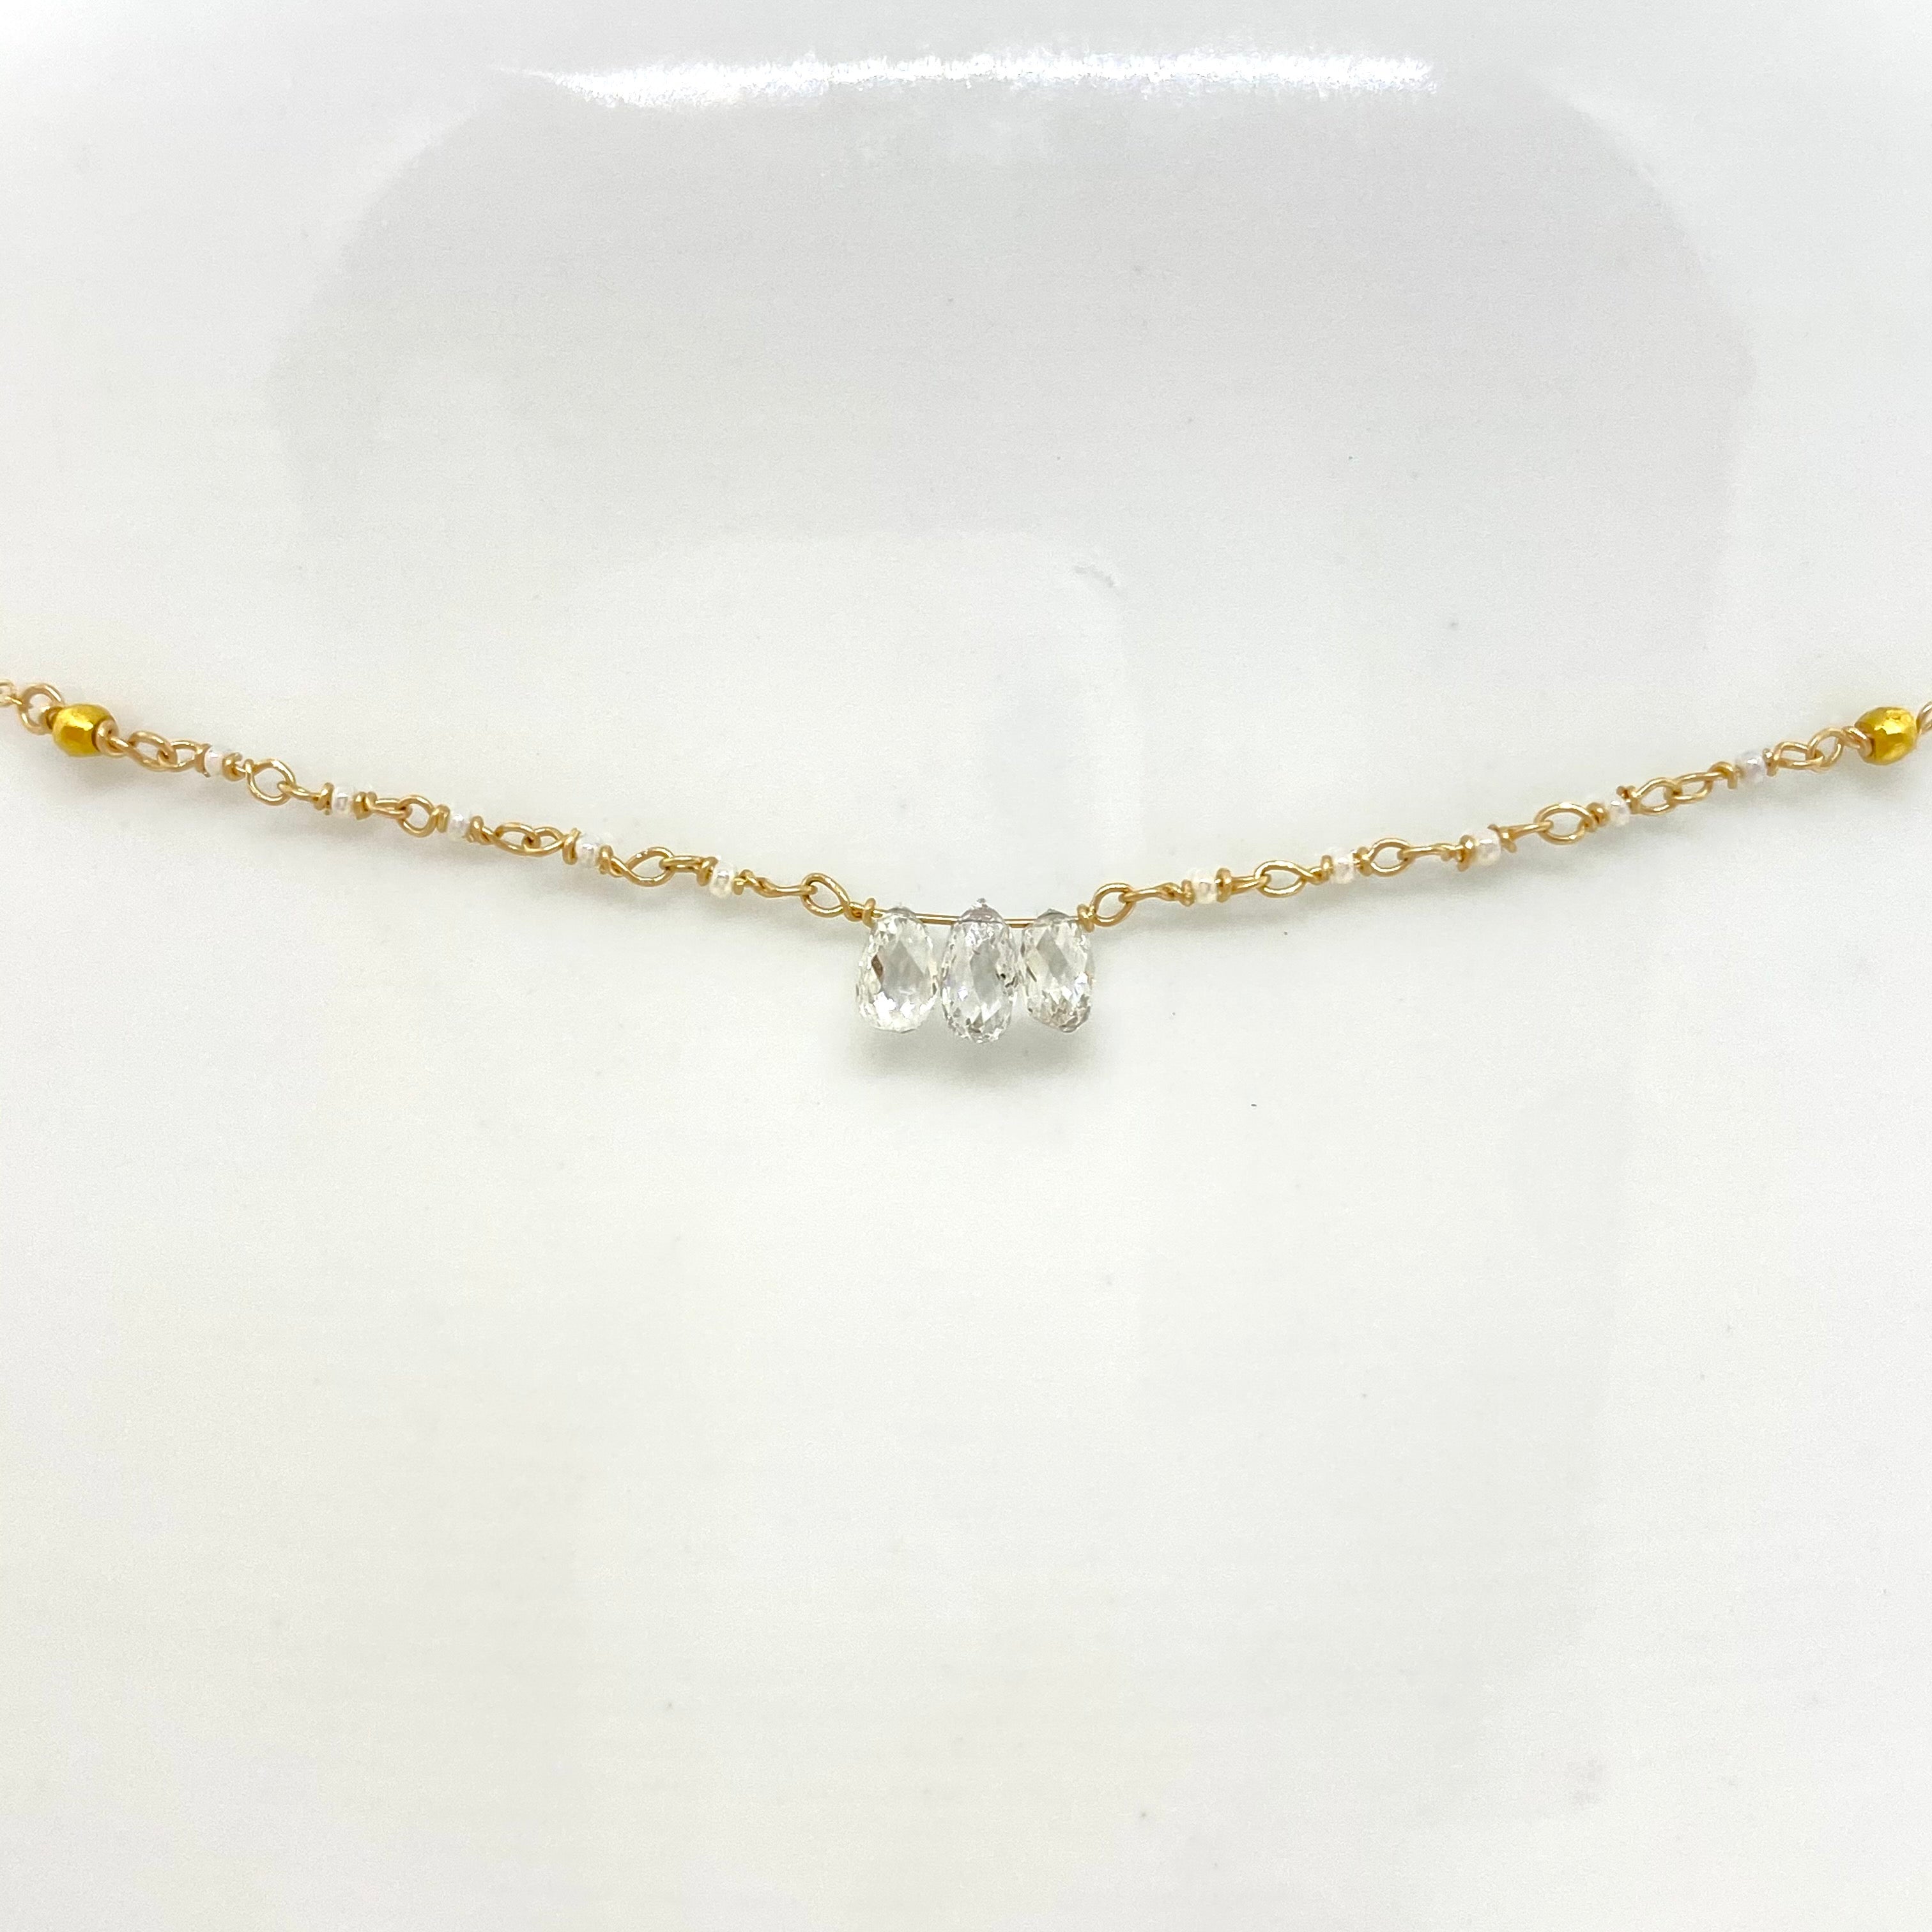 14k Gold Chain Necklace w/ Diamonds, 18k Gold Nuggets & Antique Italian Beads